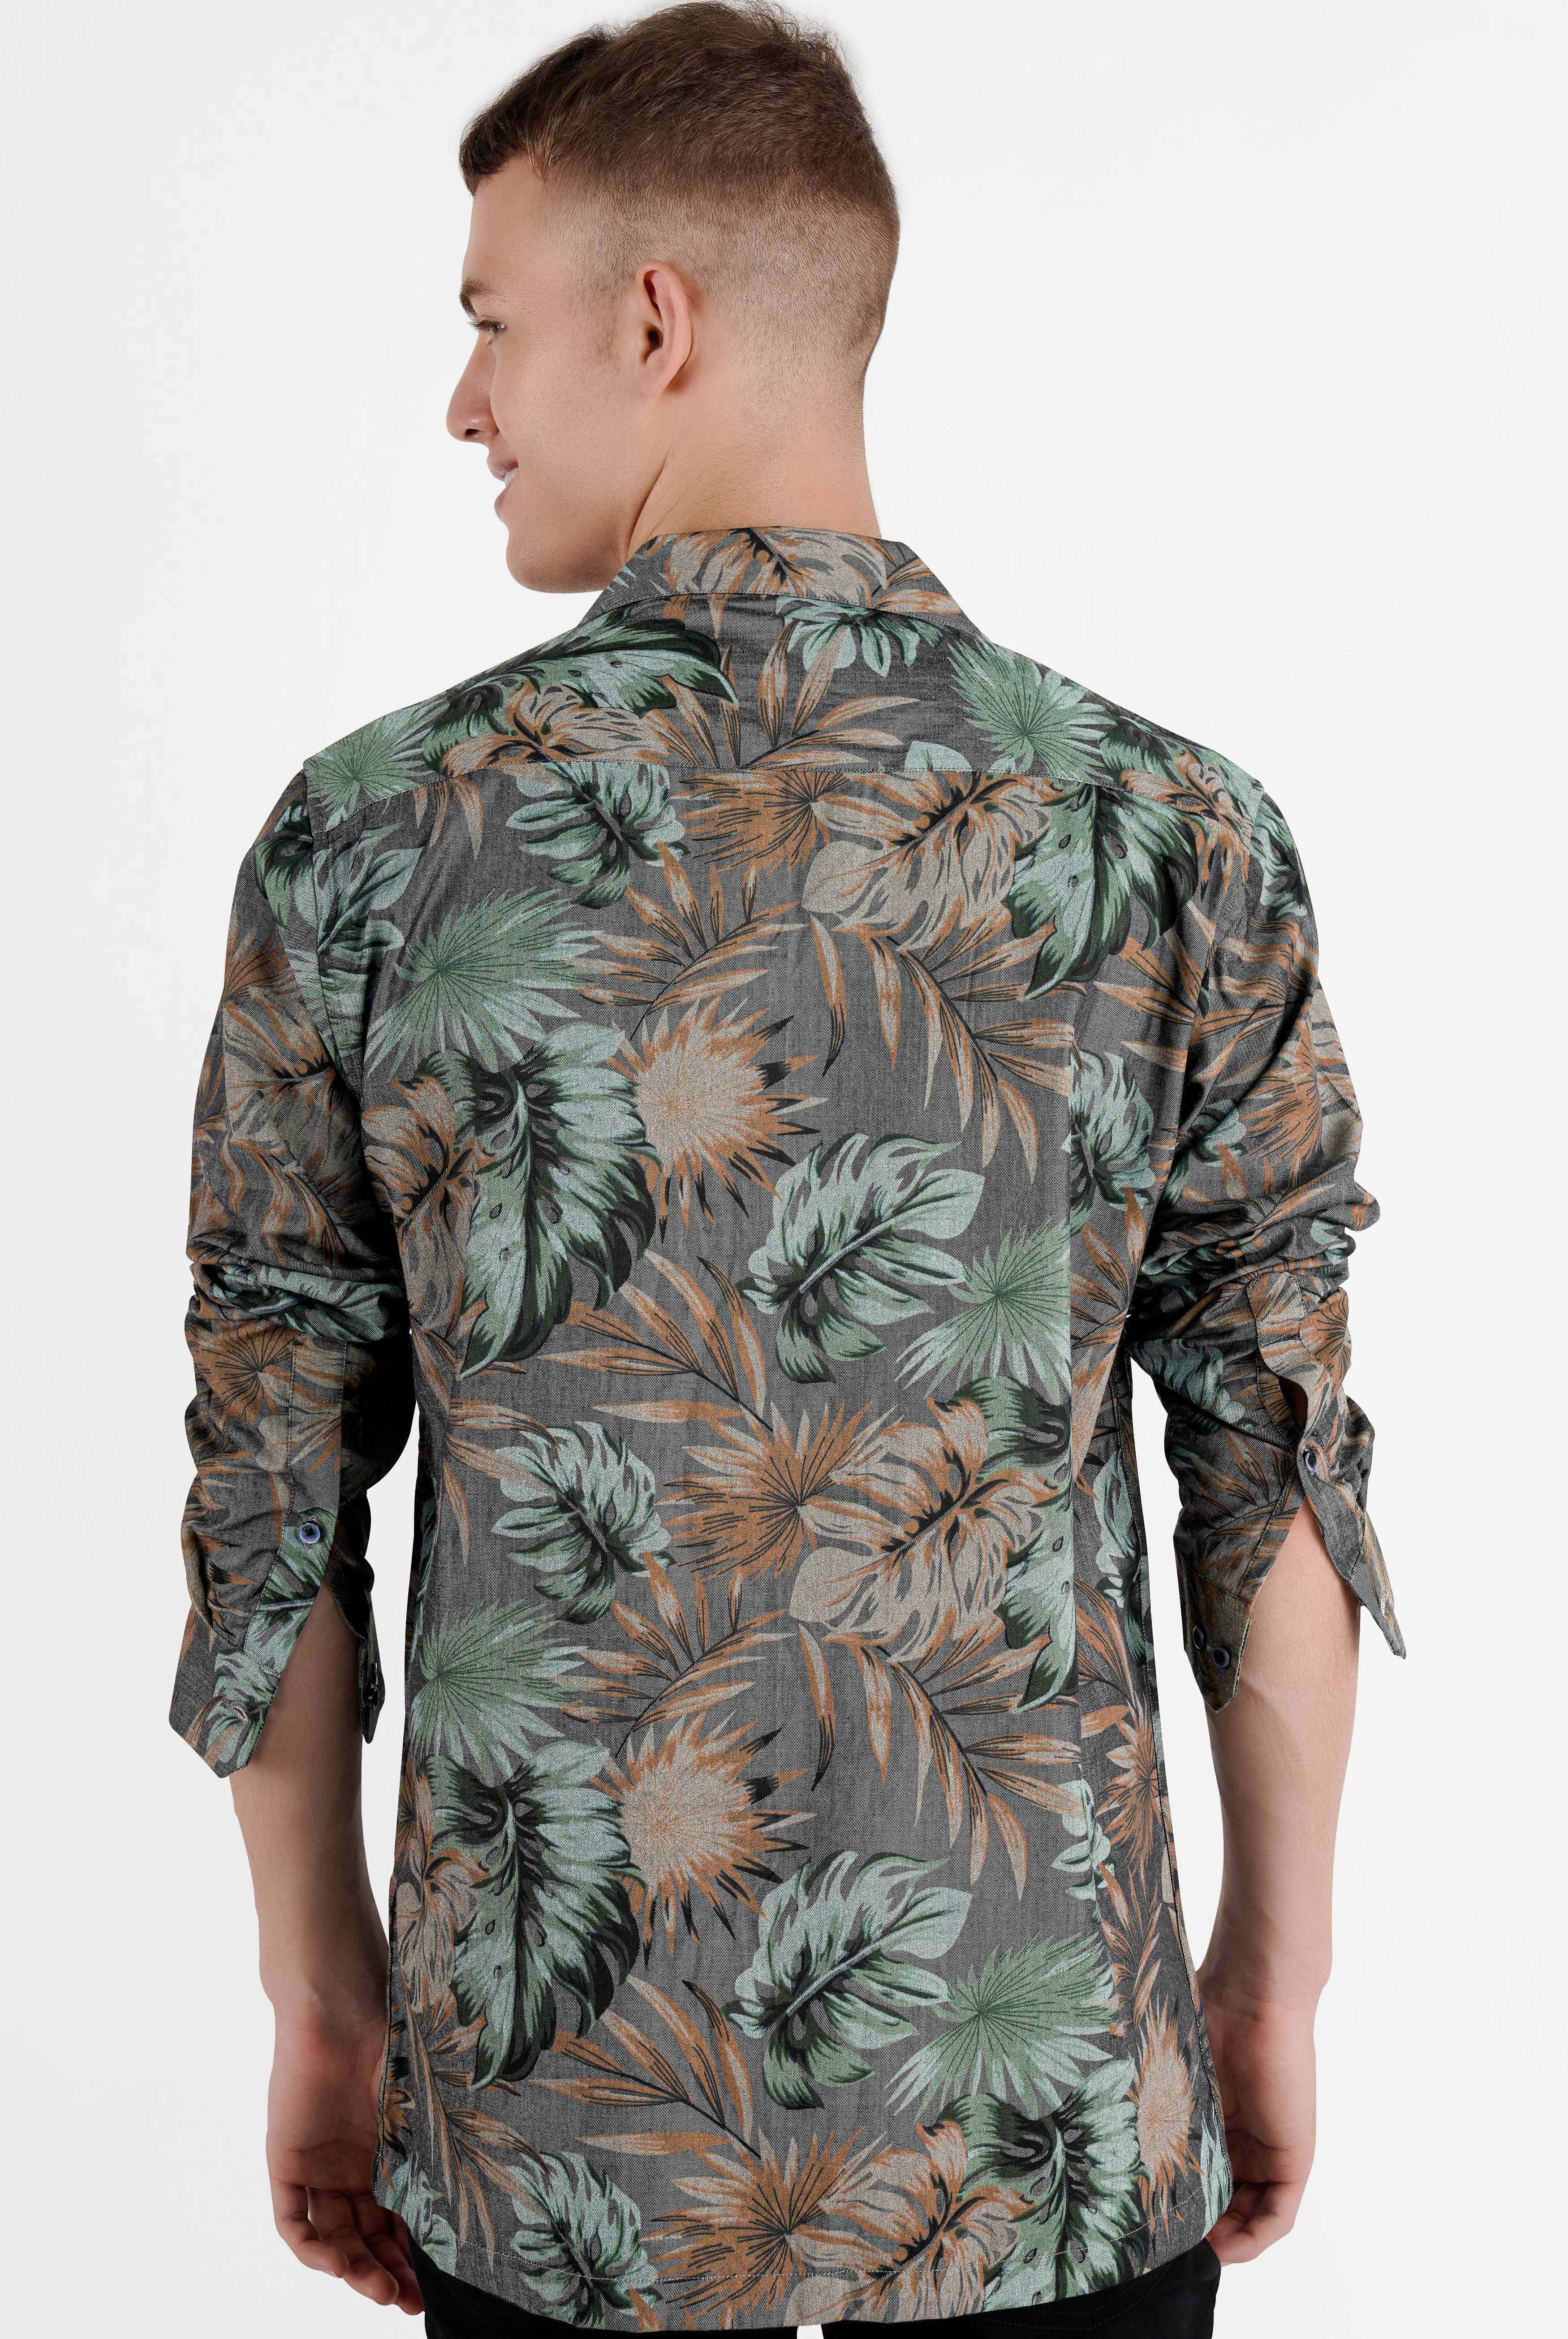 Fuscous Grey with Multi-Coloured Tropical Printed Chambray Designer Shirt